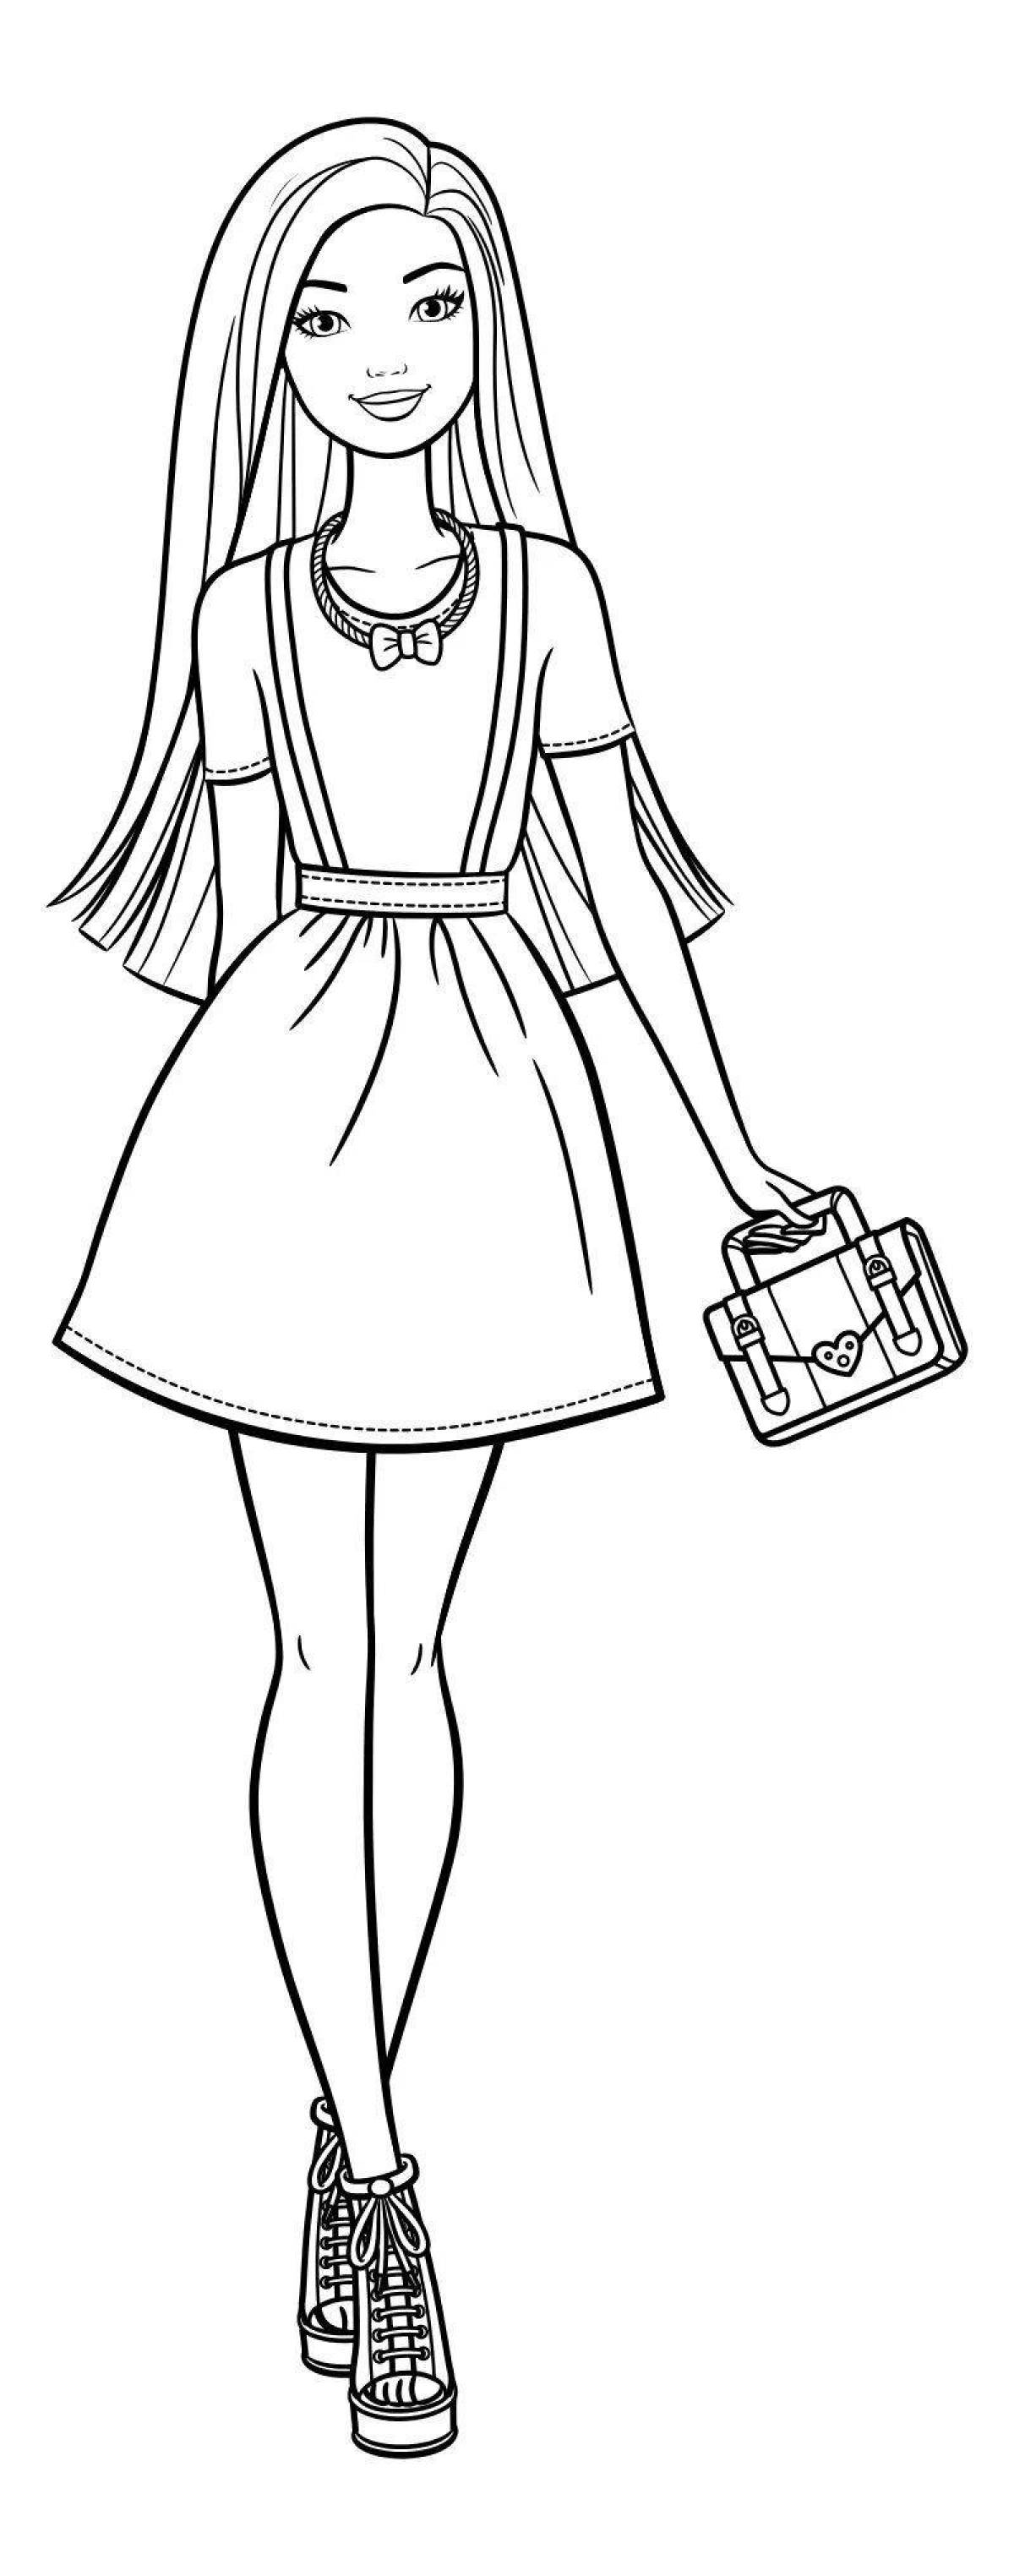 Radiant coloring page girls 12 years clothing